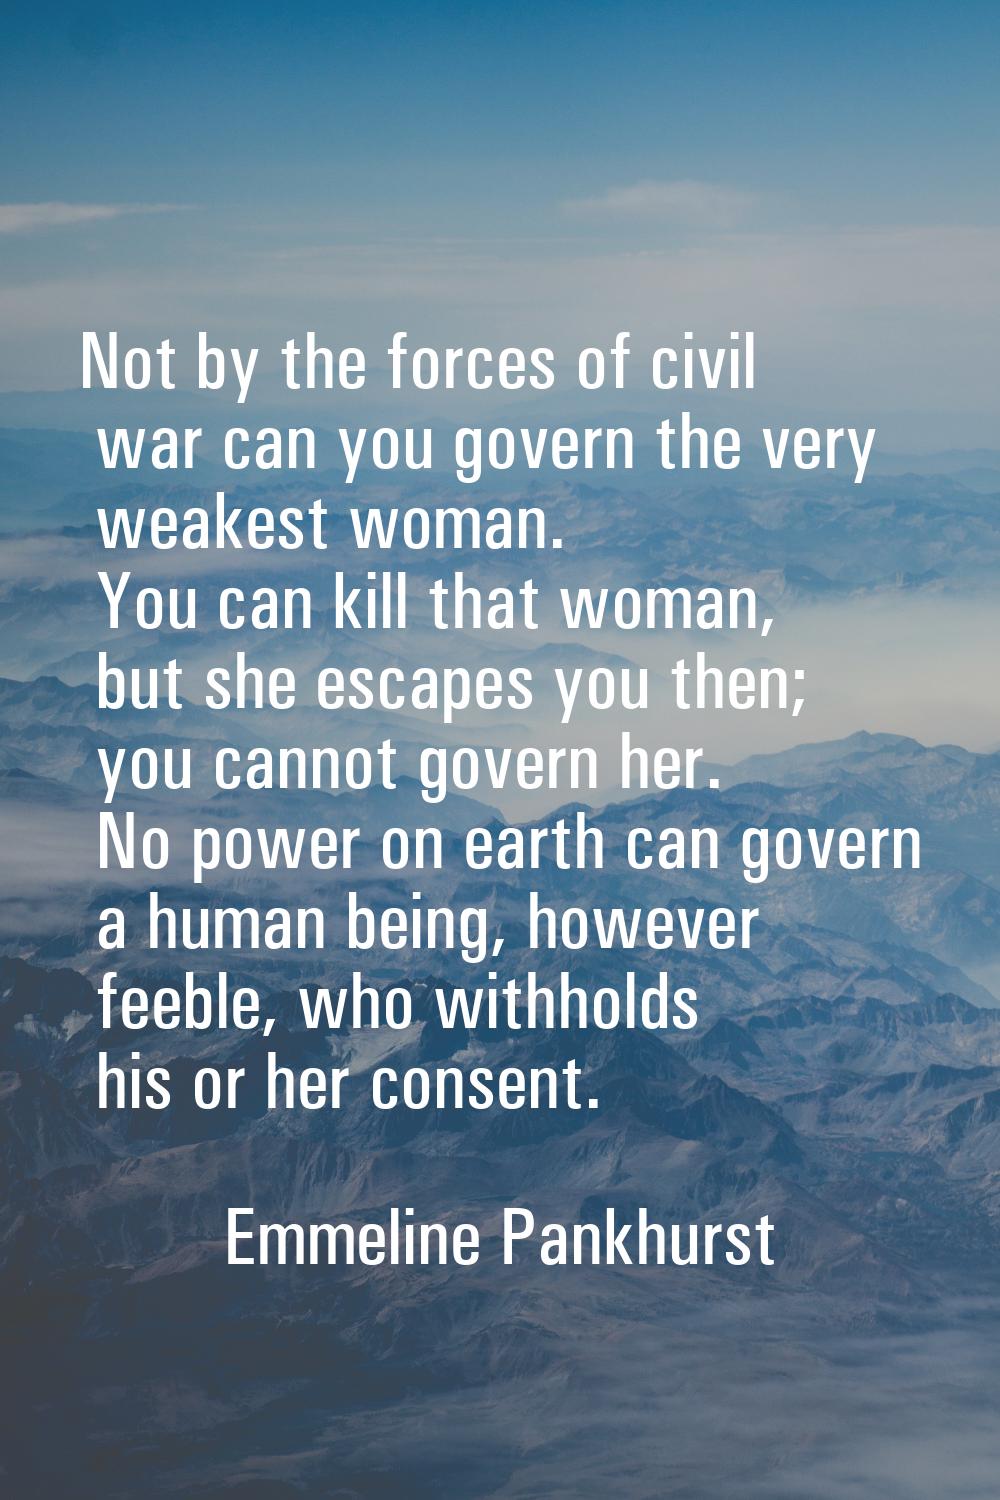 Not by the forces of civil war can you govern the very weakest woman. You can kill that woman, but 